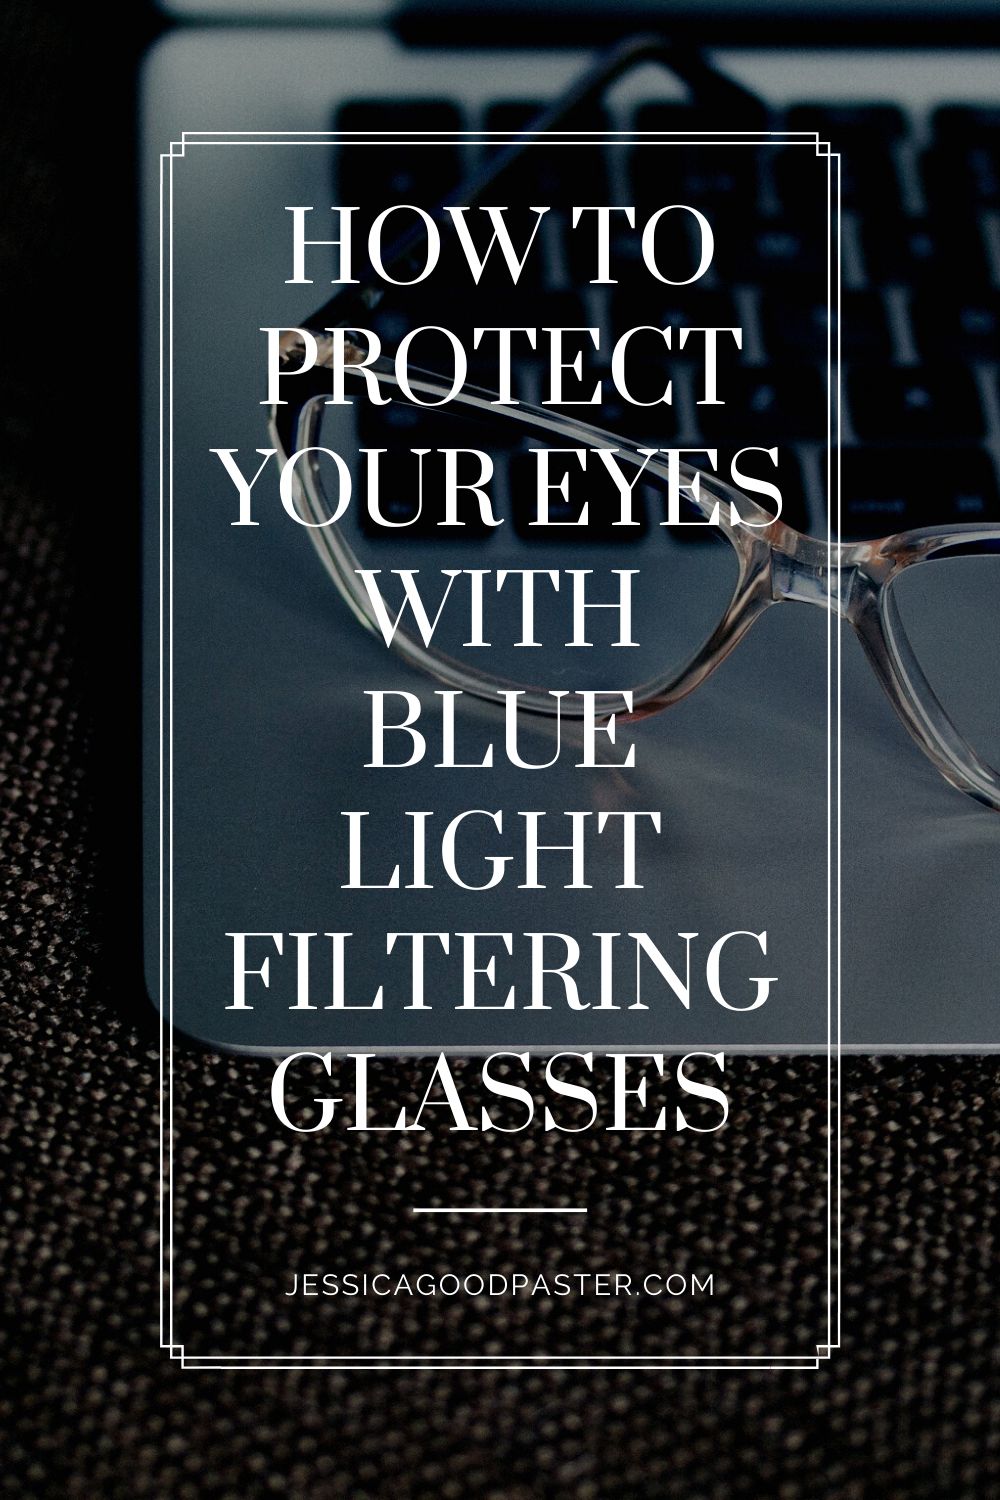 How to Protect Your Eyes with Blue Light Filtering Glasses | The extra screen time from working from home can cause eye strain. Blue light filtering glasses can help protect your vision. Luckily, Warby Parker has affordable and stylish blue light lenses that you'll love. #bluelightglasses #bluelightblockers #workfromhome #glasses #eyewear #warbyparker